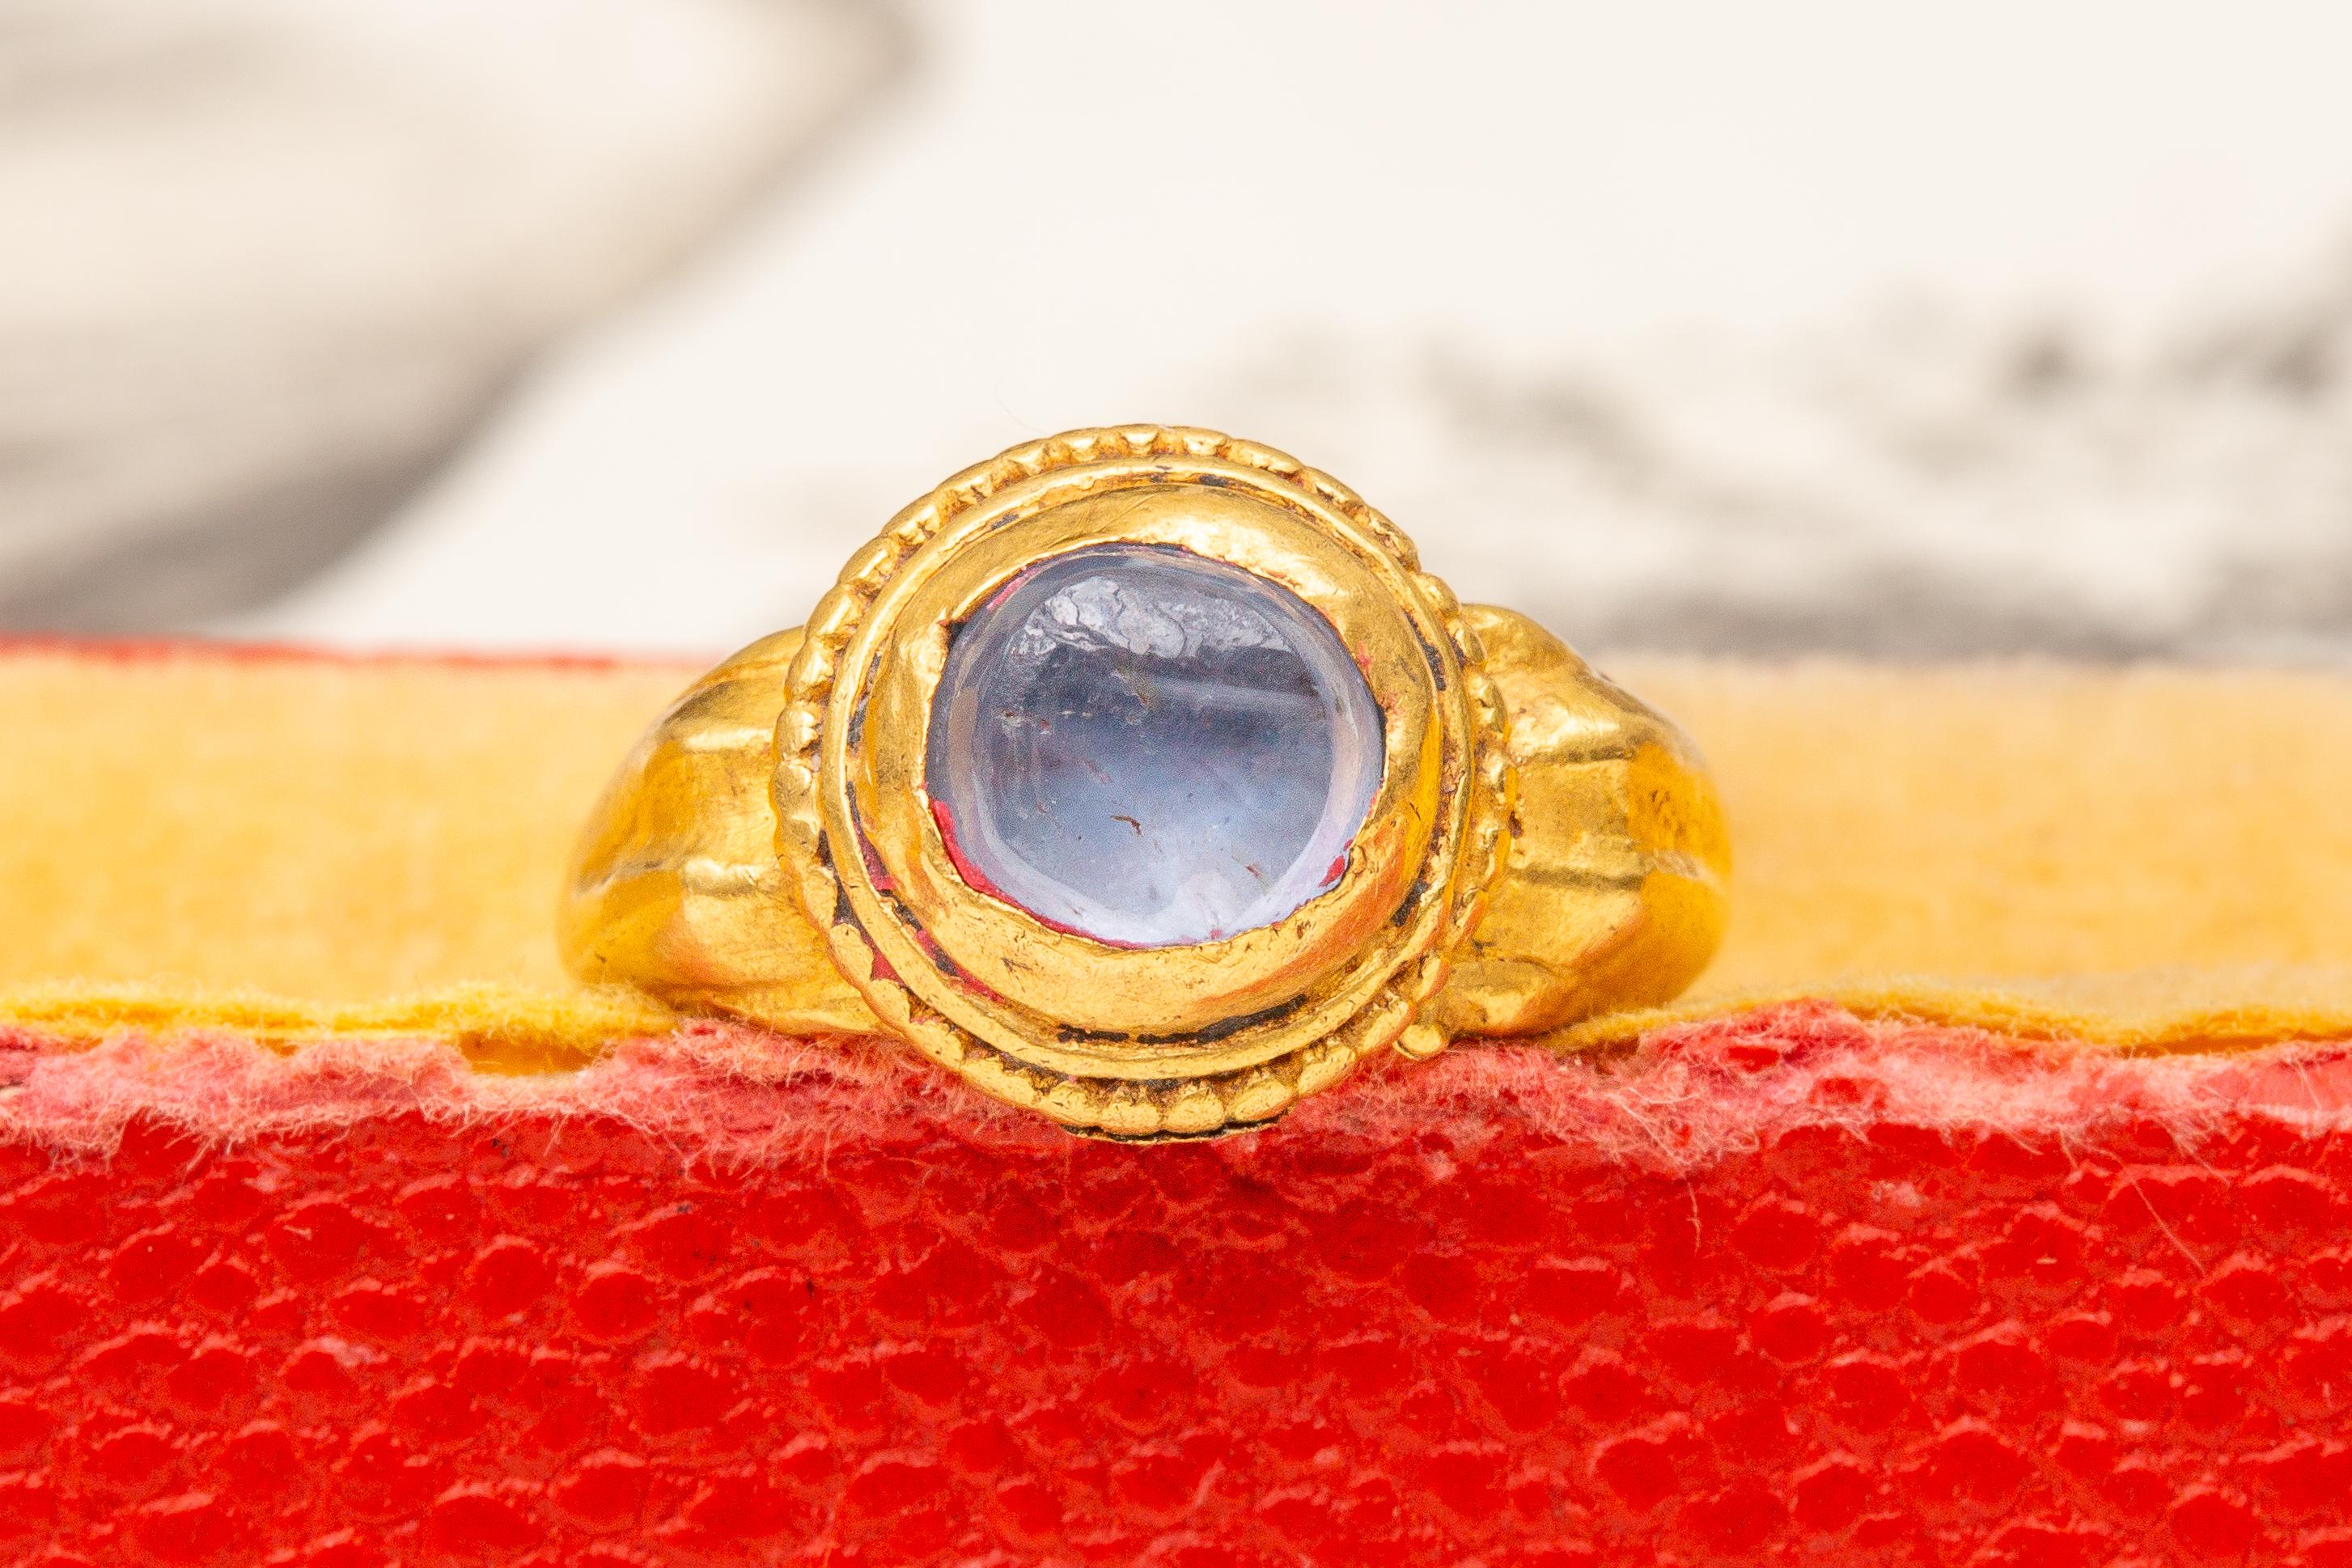 A scarce ancient Javanese gold and sapphire ring dating from the 7th-15th century Indonesian Classical period. 

As expected with Javanese gem-set gold rings made in this period, the present ring is crafted with folded sheets of high-karat gold and